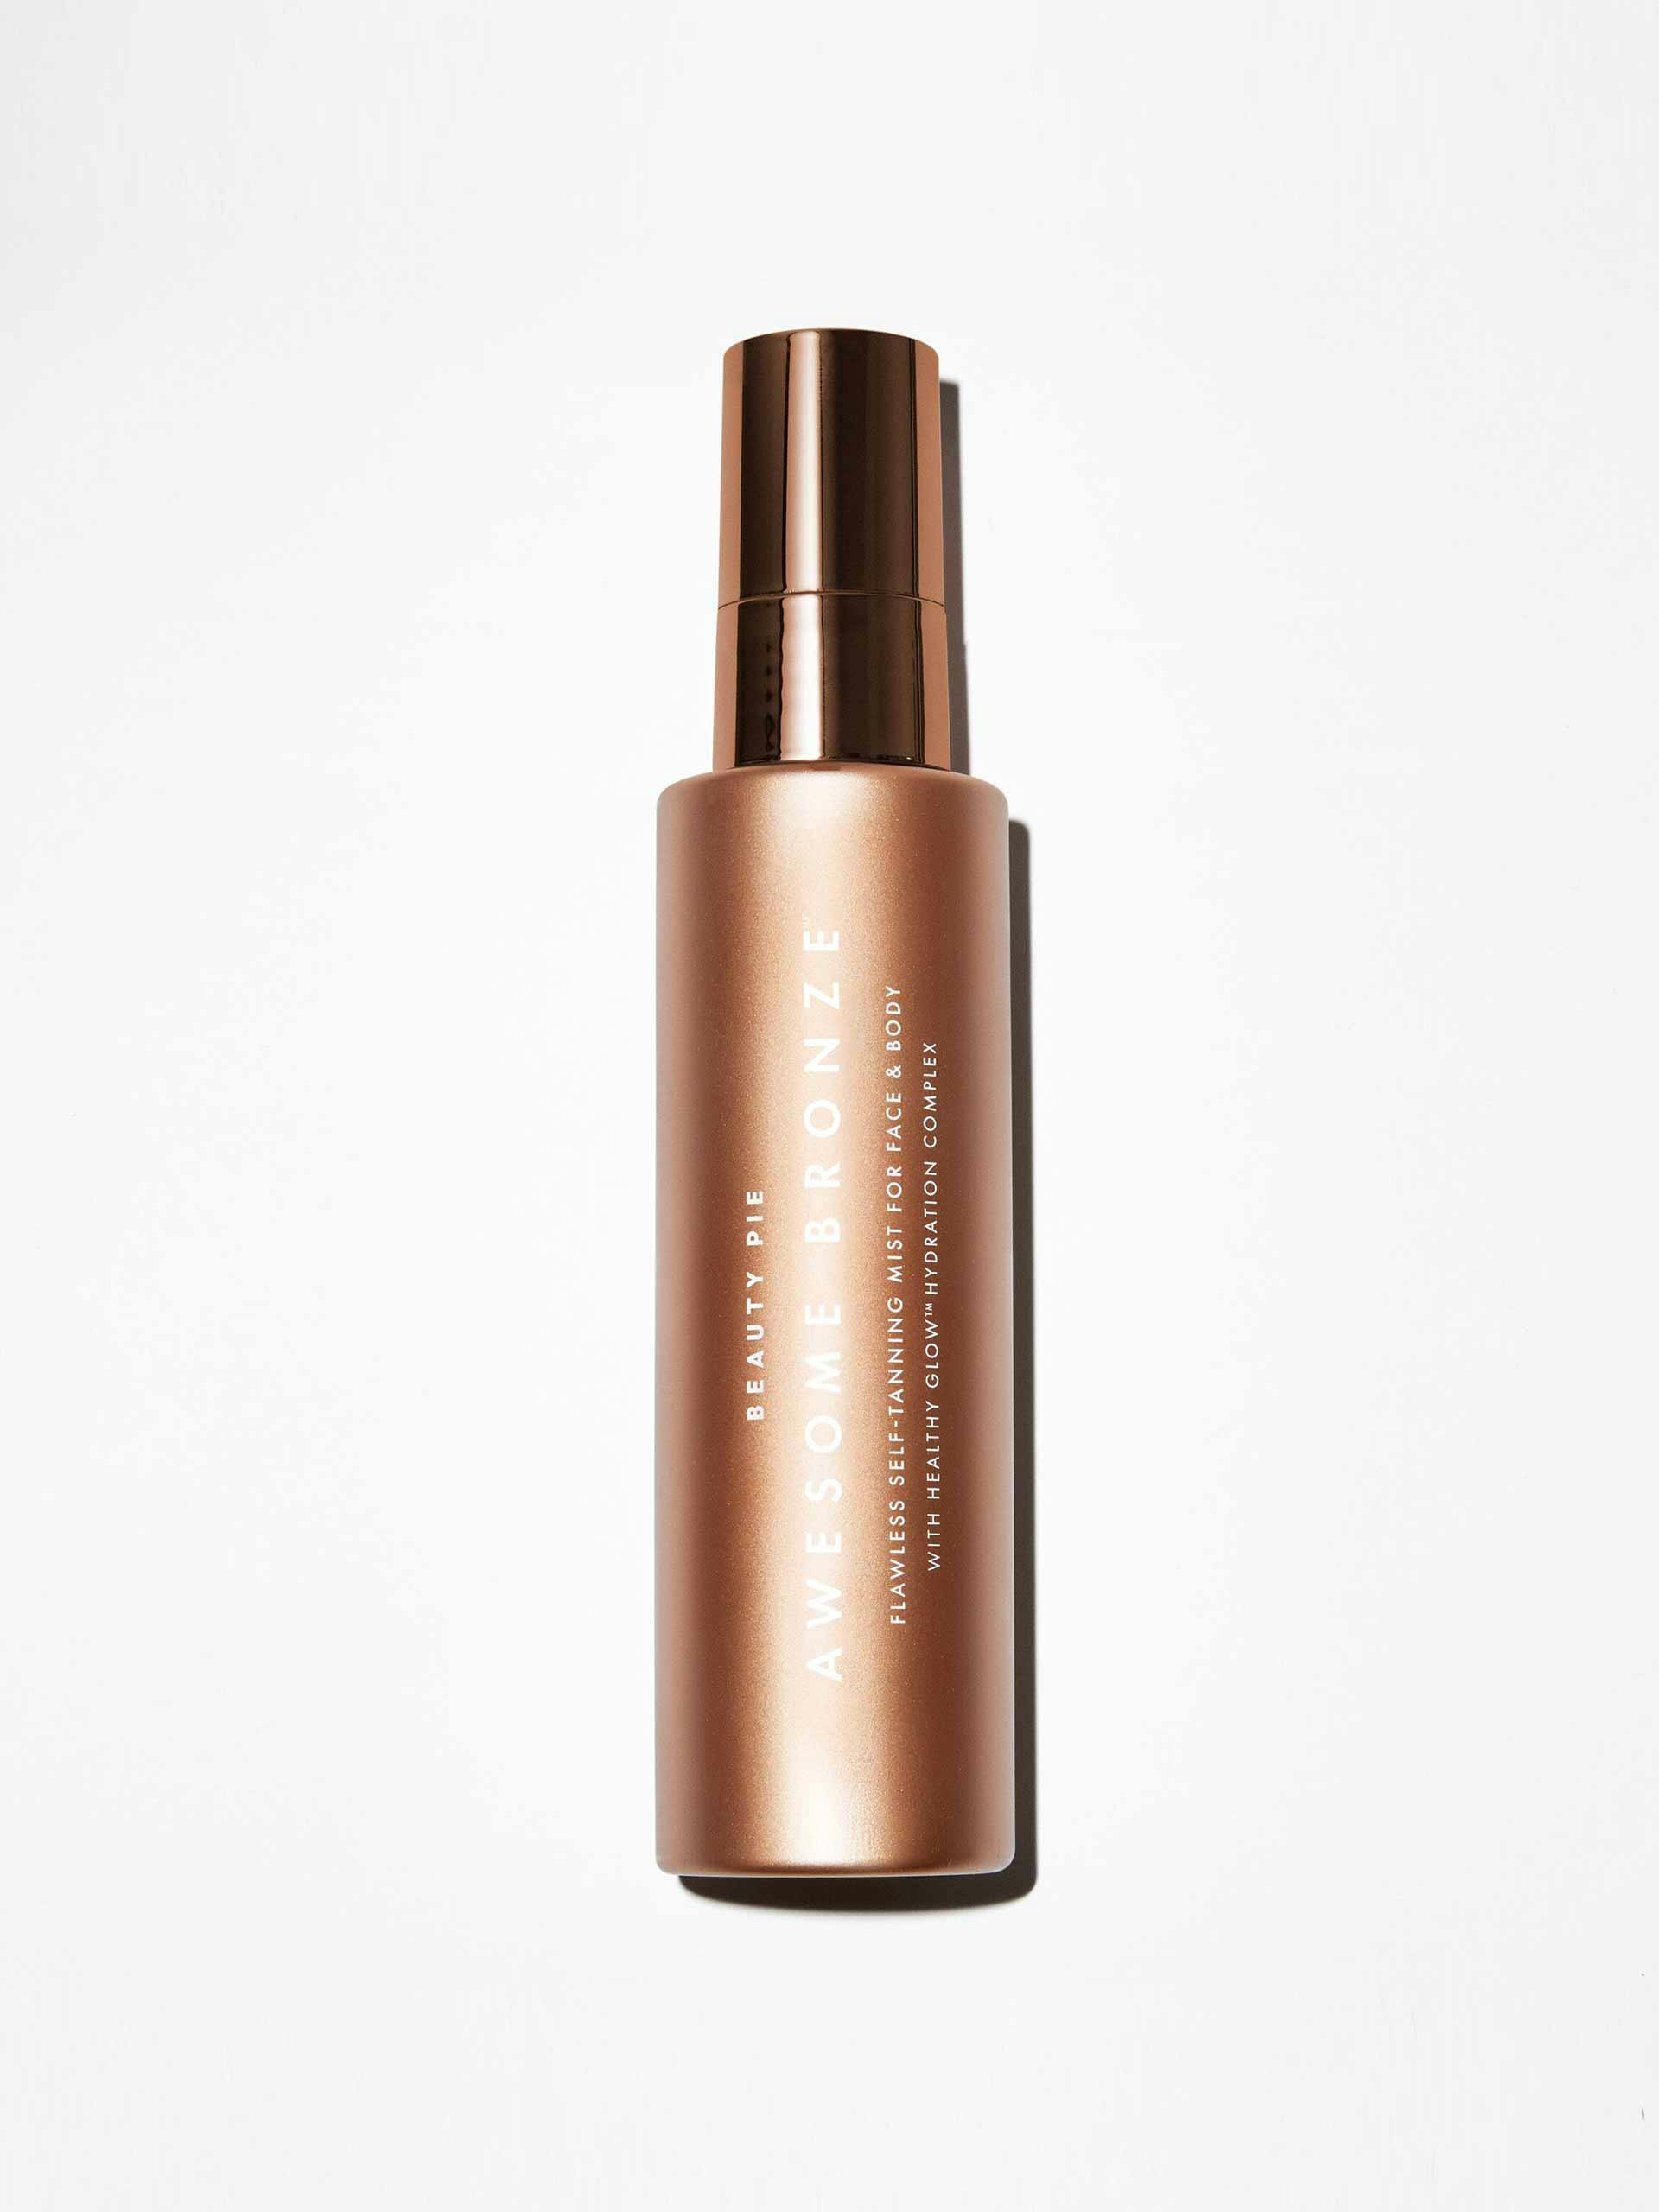 Awesome Bronze self-tanning mist